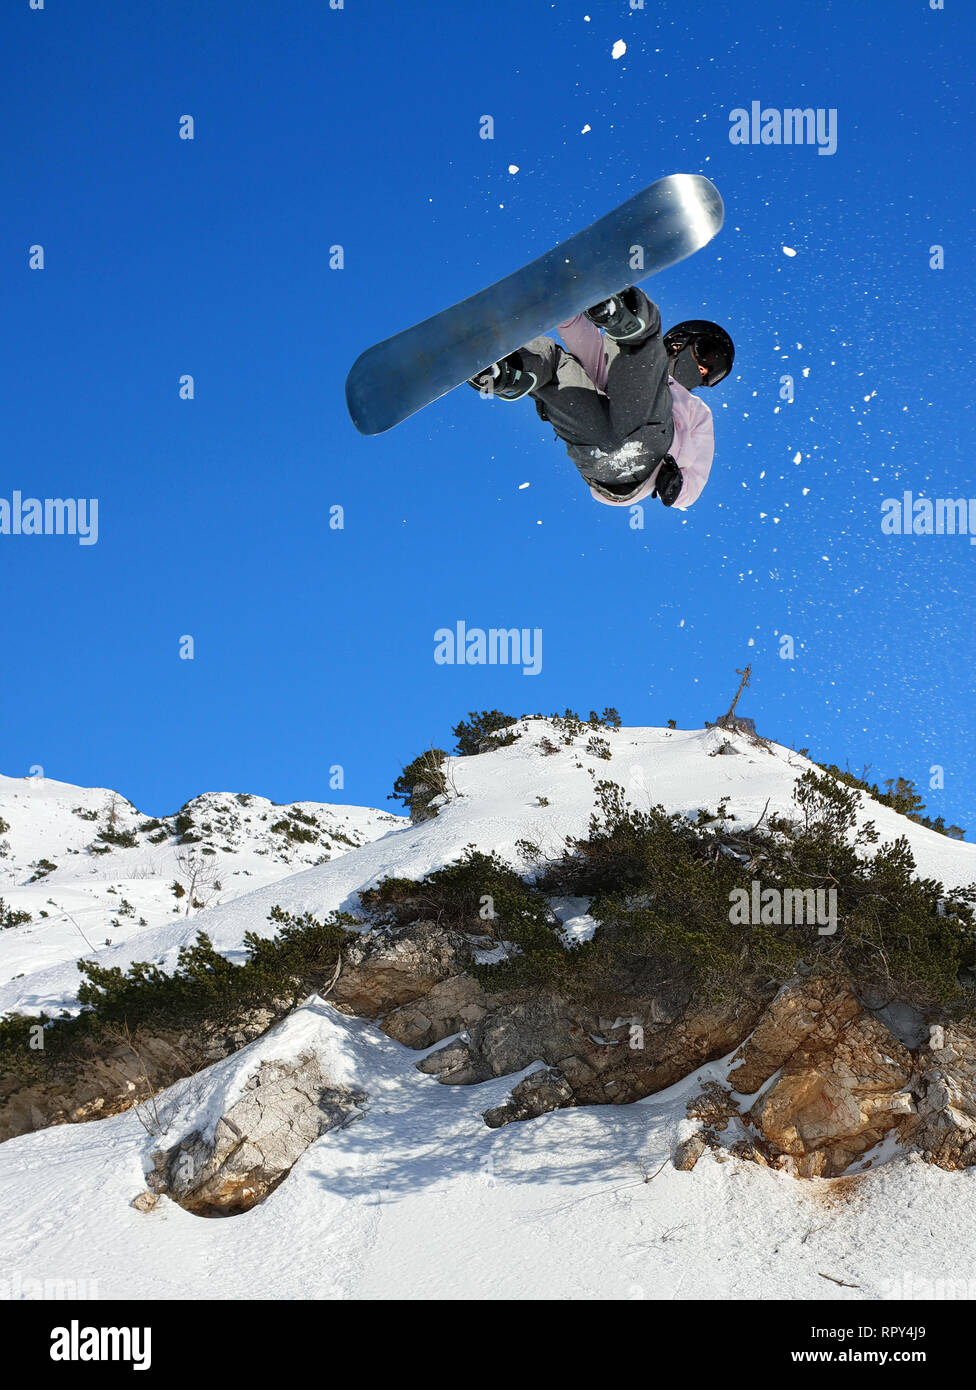 Snowboarding Snowboard Snowboarder at jump mountains at sunny day Stock Photo